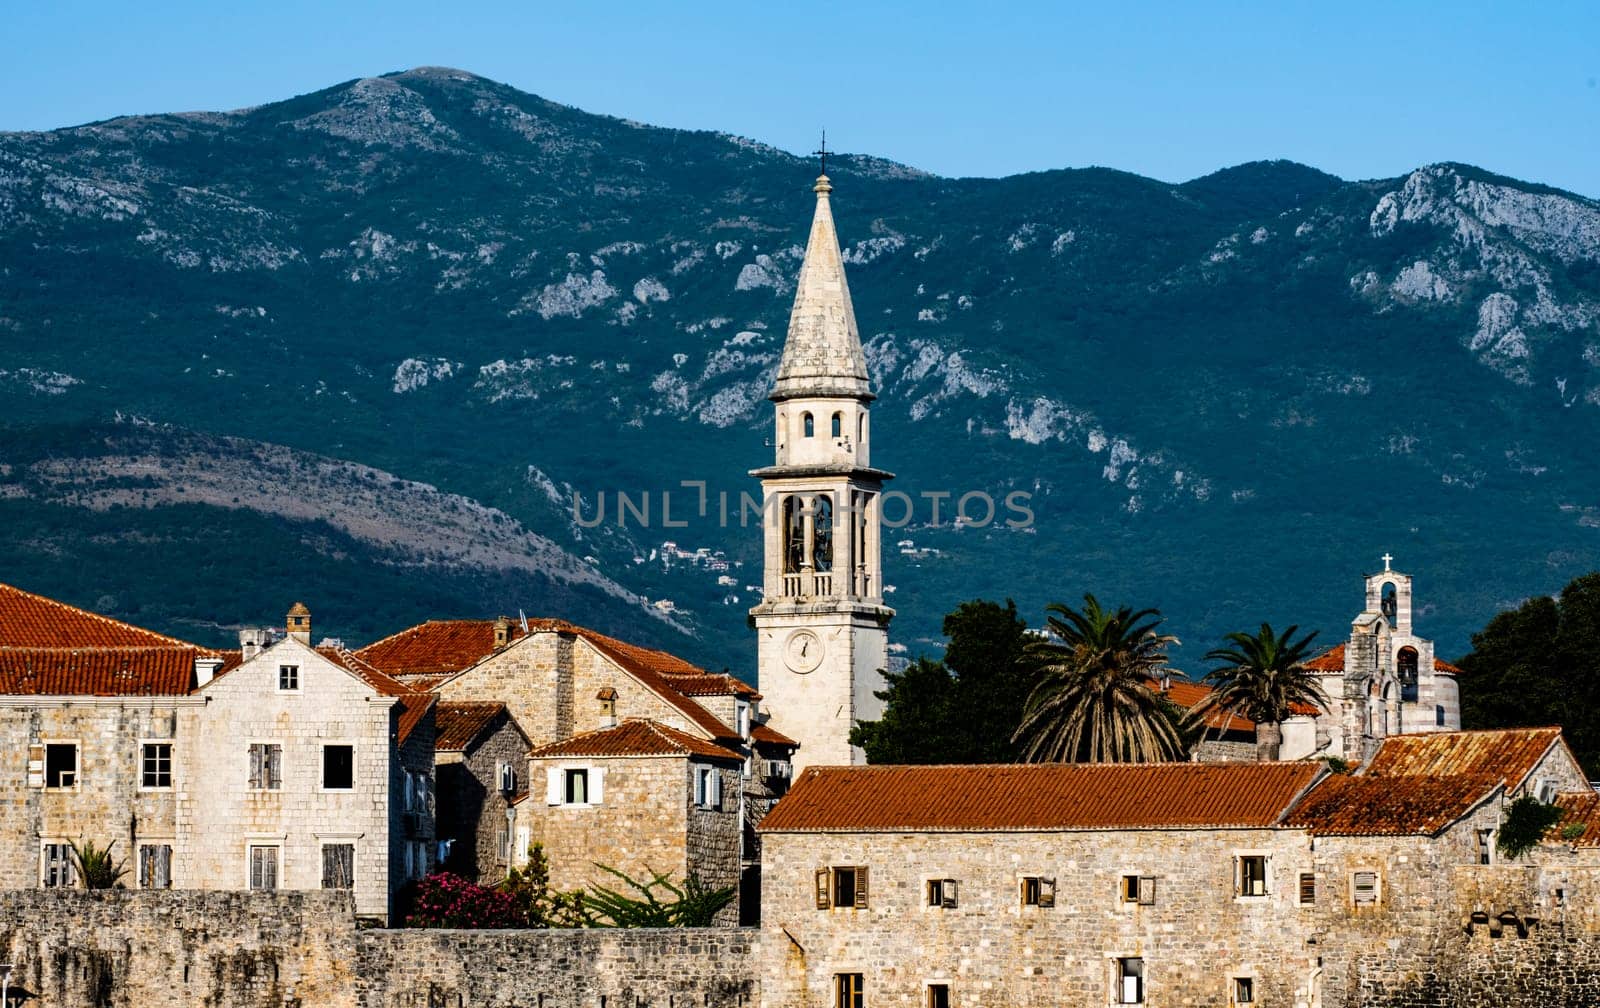 Ancient Budva in Montenegro scenic view from adriatic sea. Old mediterranean architecture with orange roofs surrounded with mountains